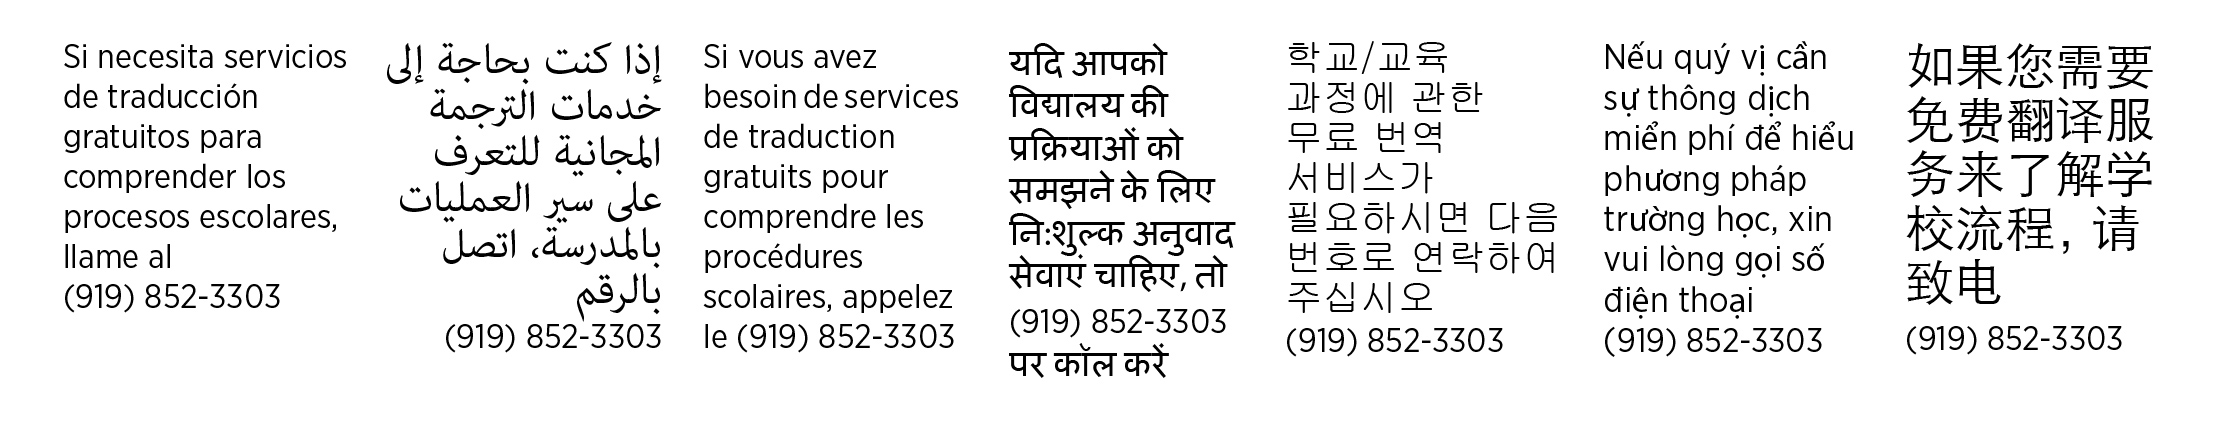 If free translation services are needed to understand school processes, call 919-852-3303